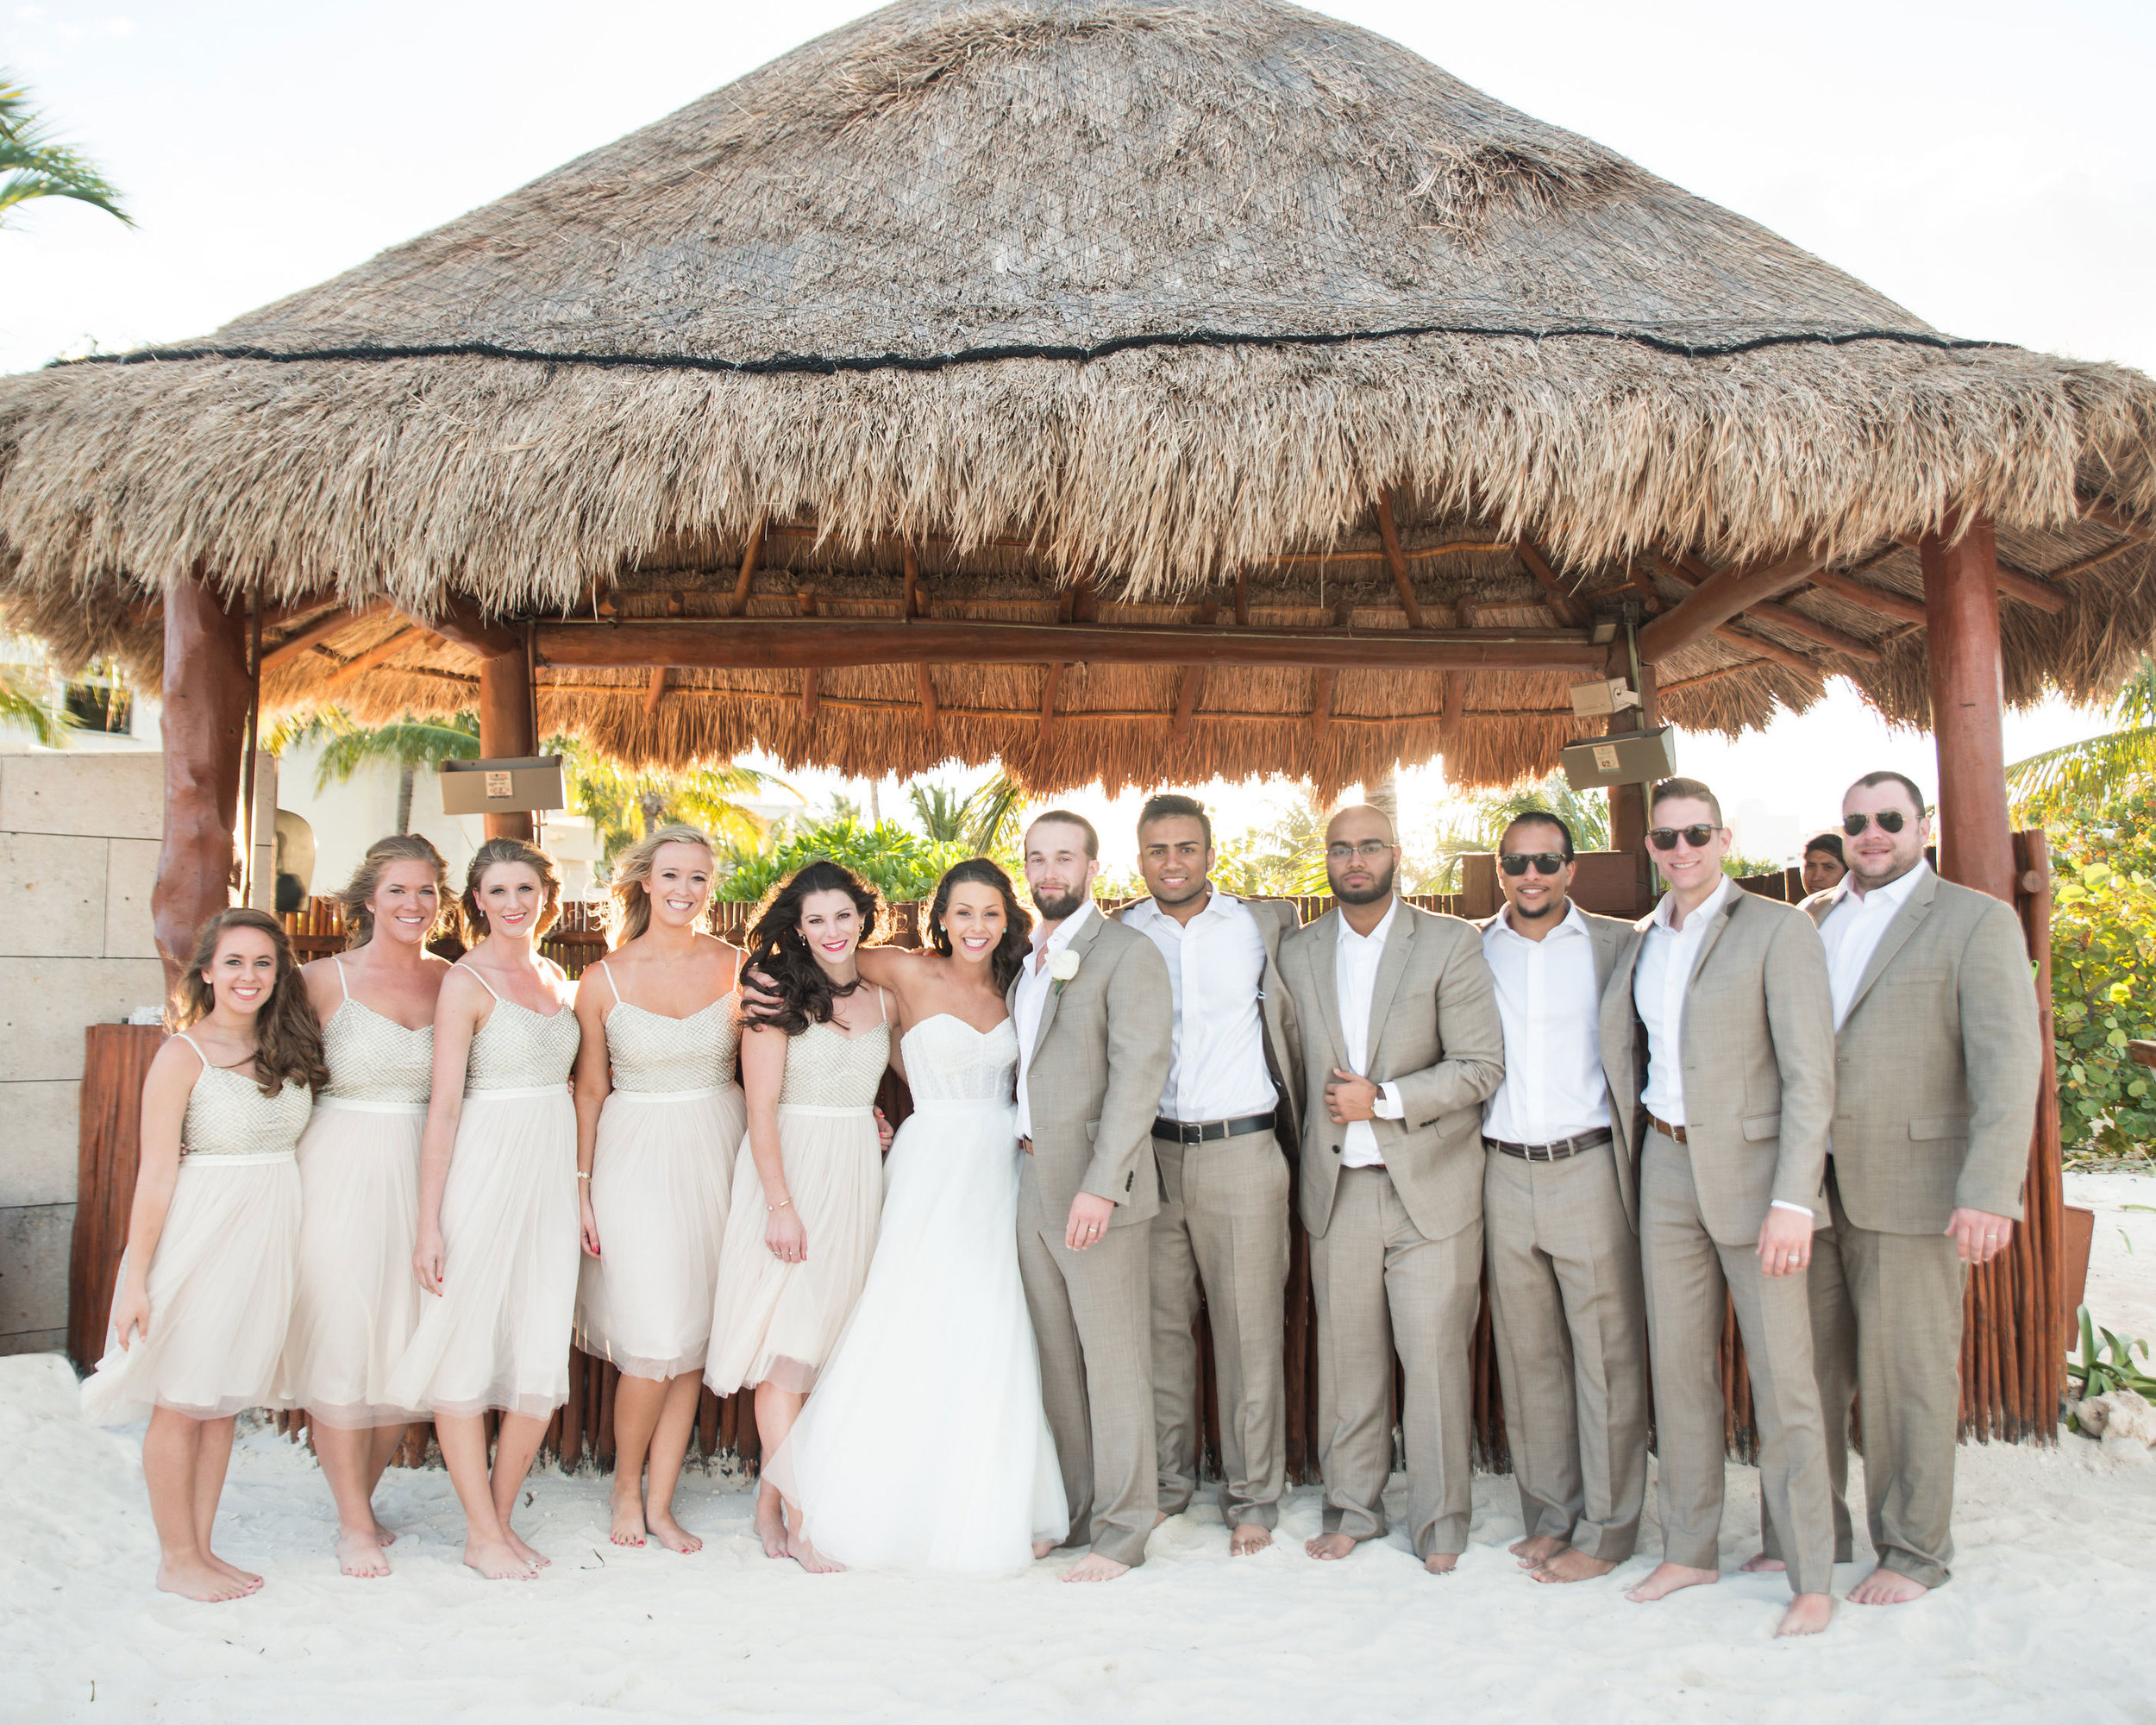 Destination wedding in Mexico, Wedding party at cocktail hour in a tiki hut.